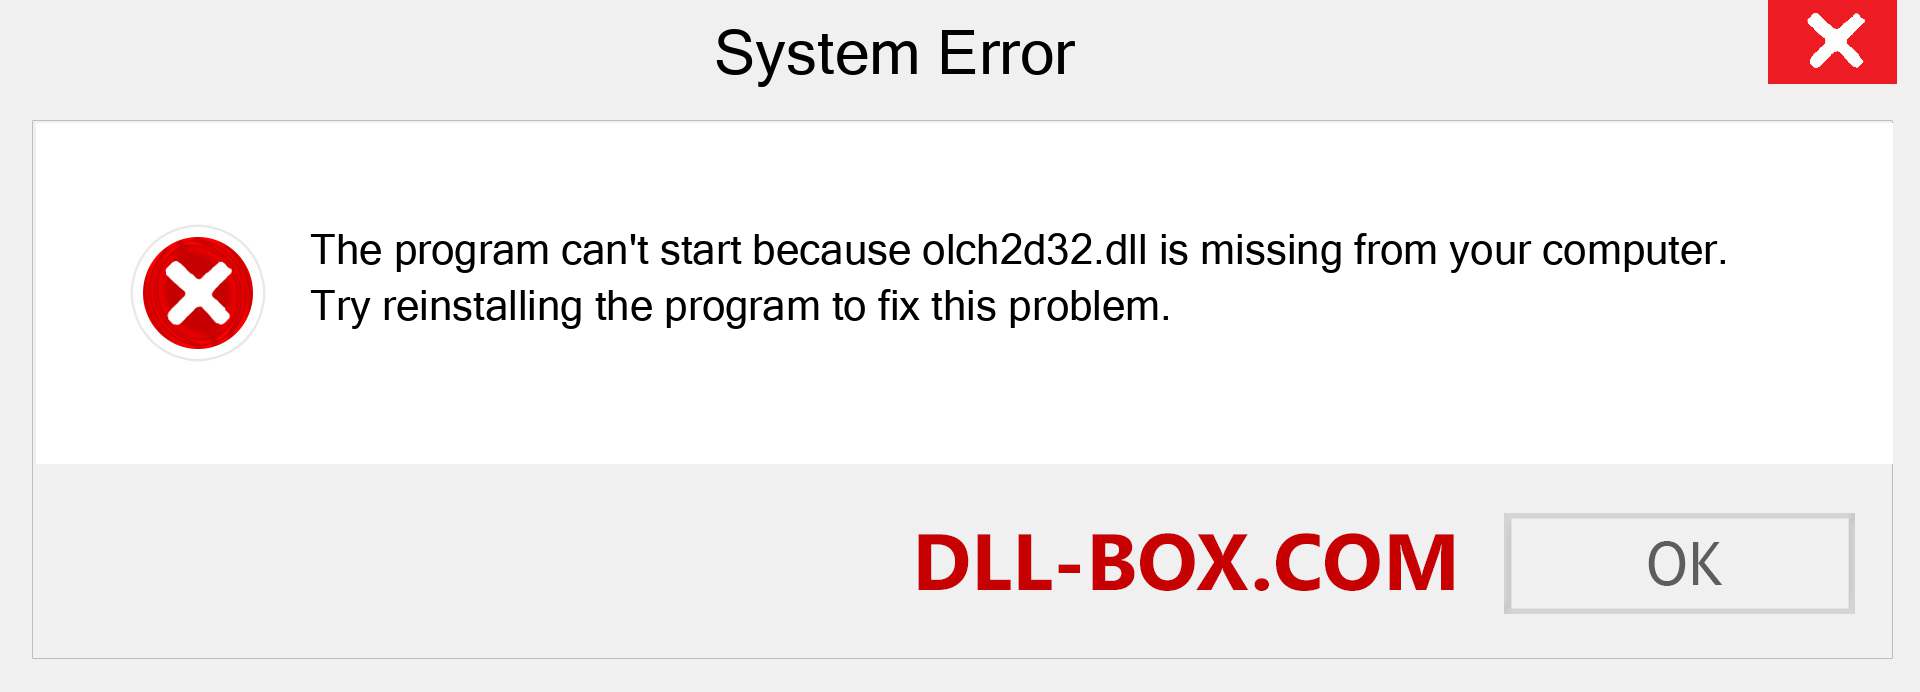  olch2d32.dll file is missing?. Download for Windows 7, 8, 10 - Fix  olch2d32 dll Missing Error on Windows, photos, images